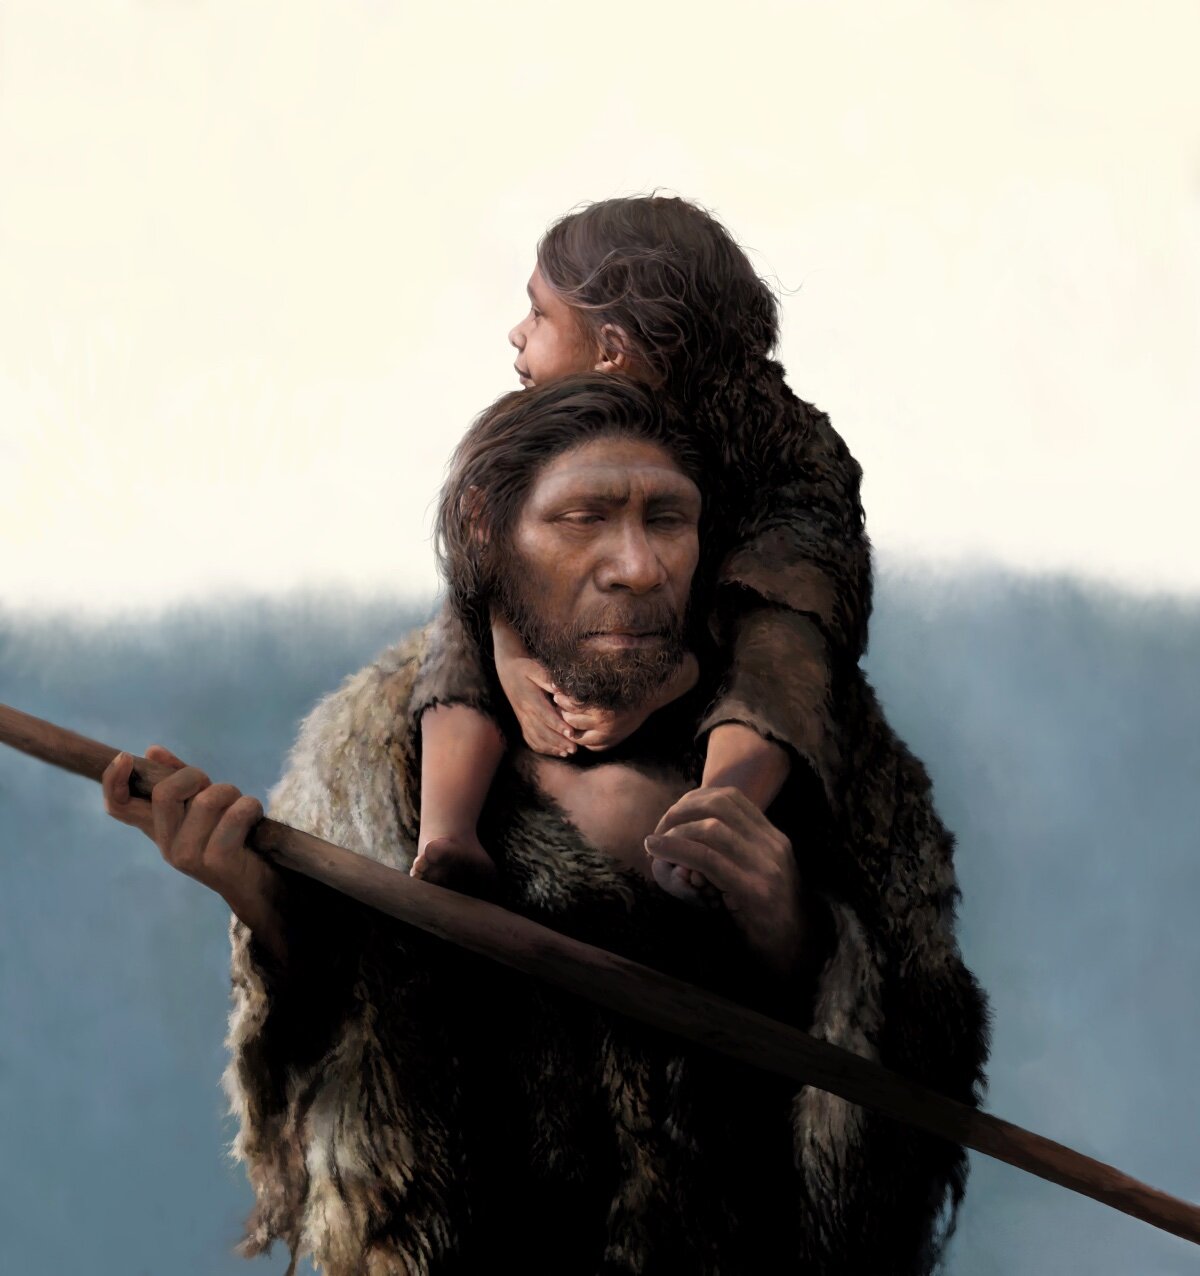 Meet the first Neanderthal family